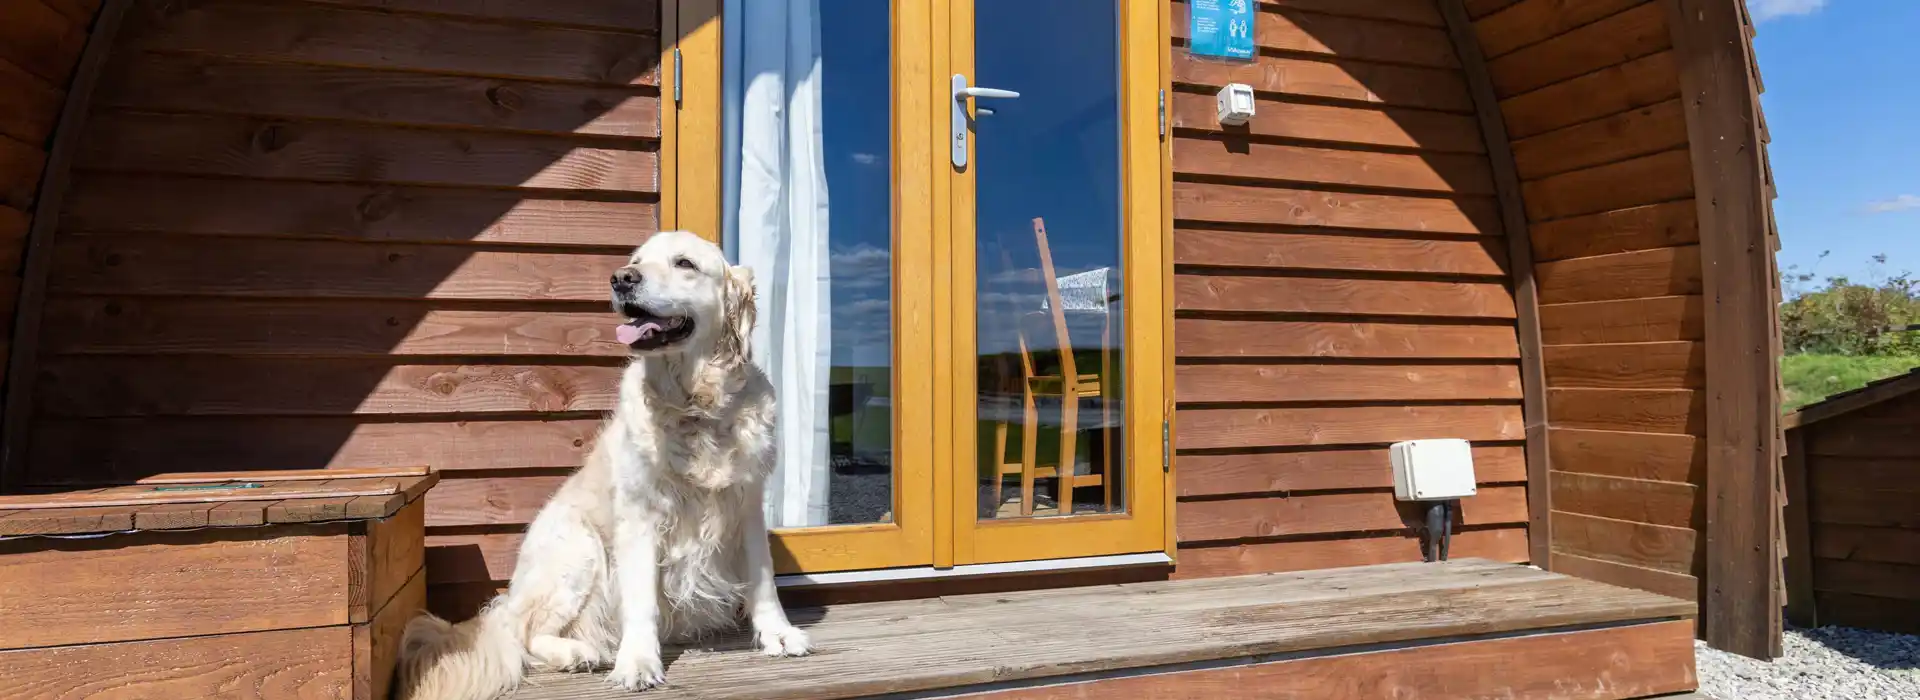 Dog friendly camping and glamping pods in Wales